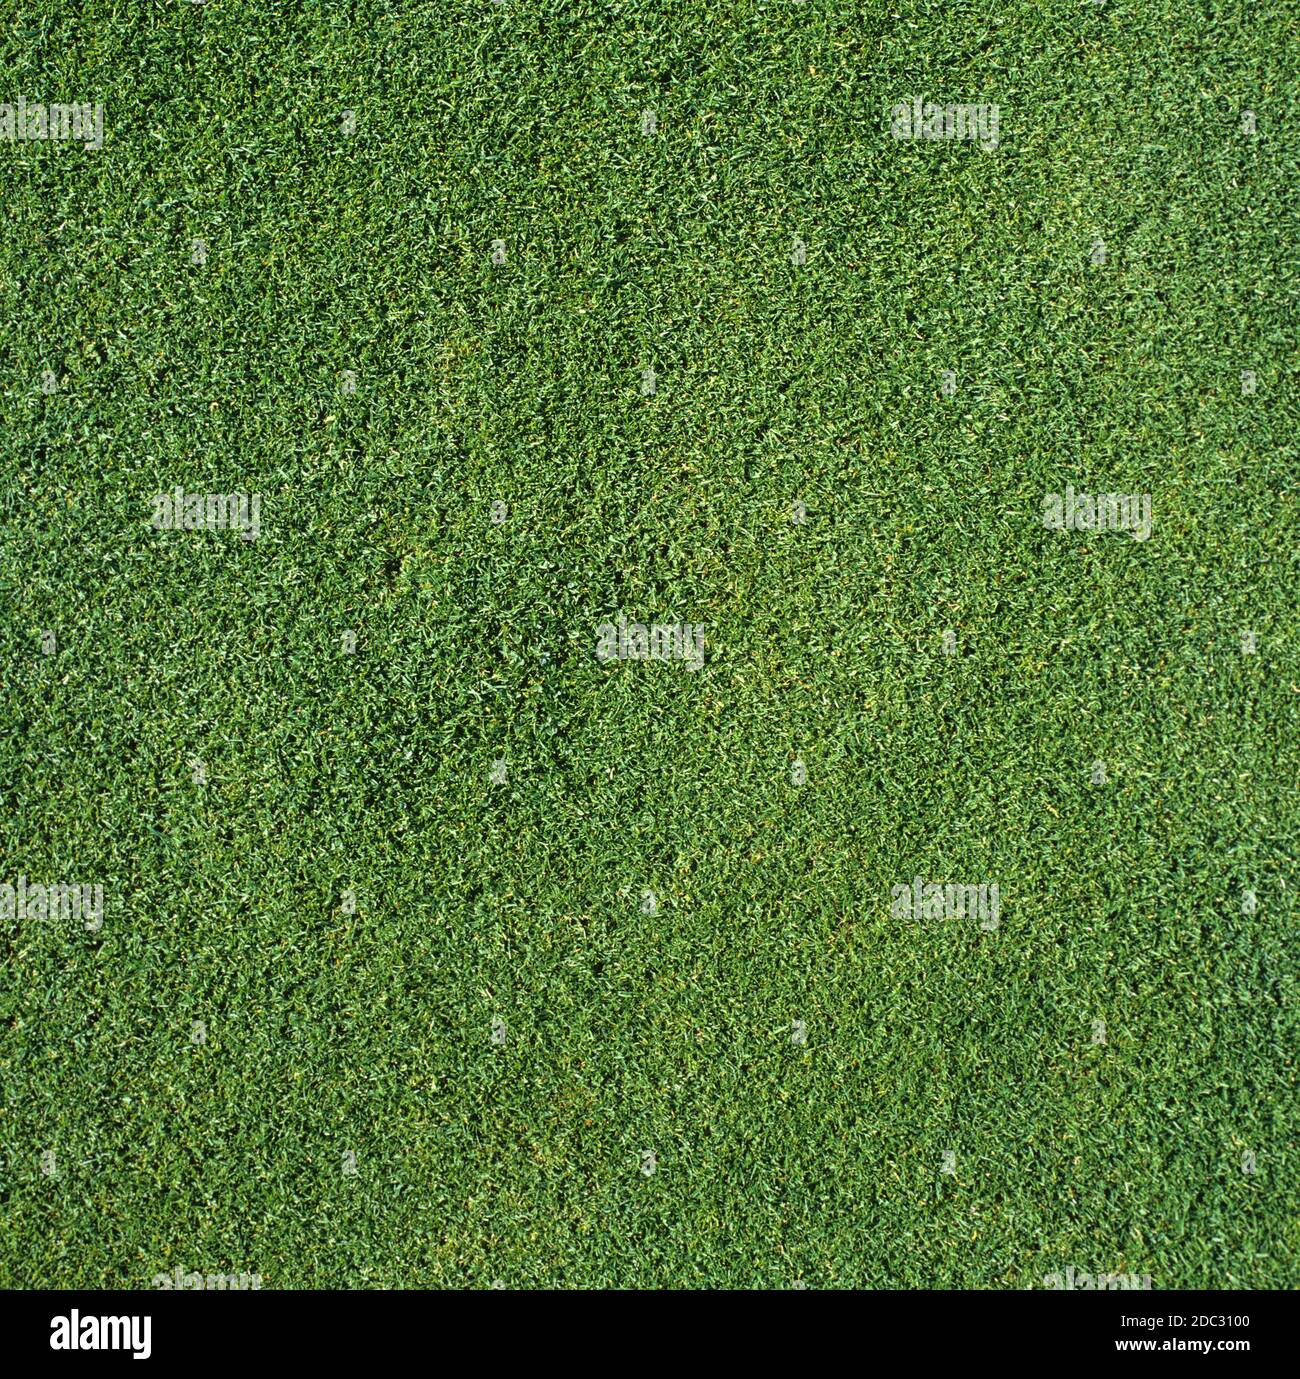 Healthy short even grass on a golf green in autumn, Wentworth, Surrey, October Stock Photo